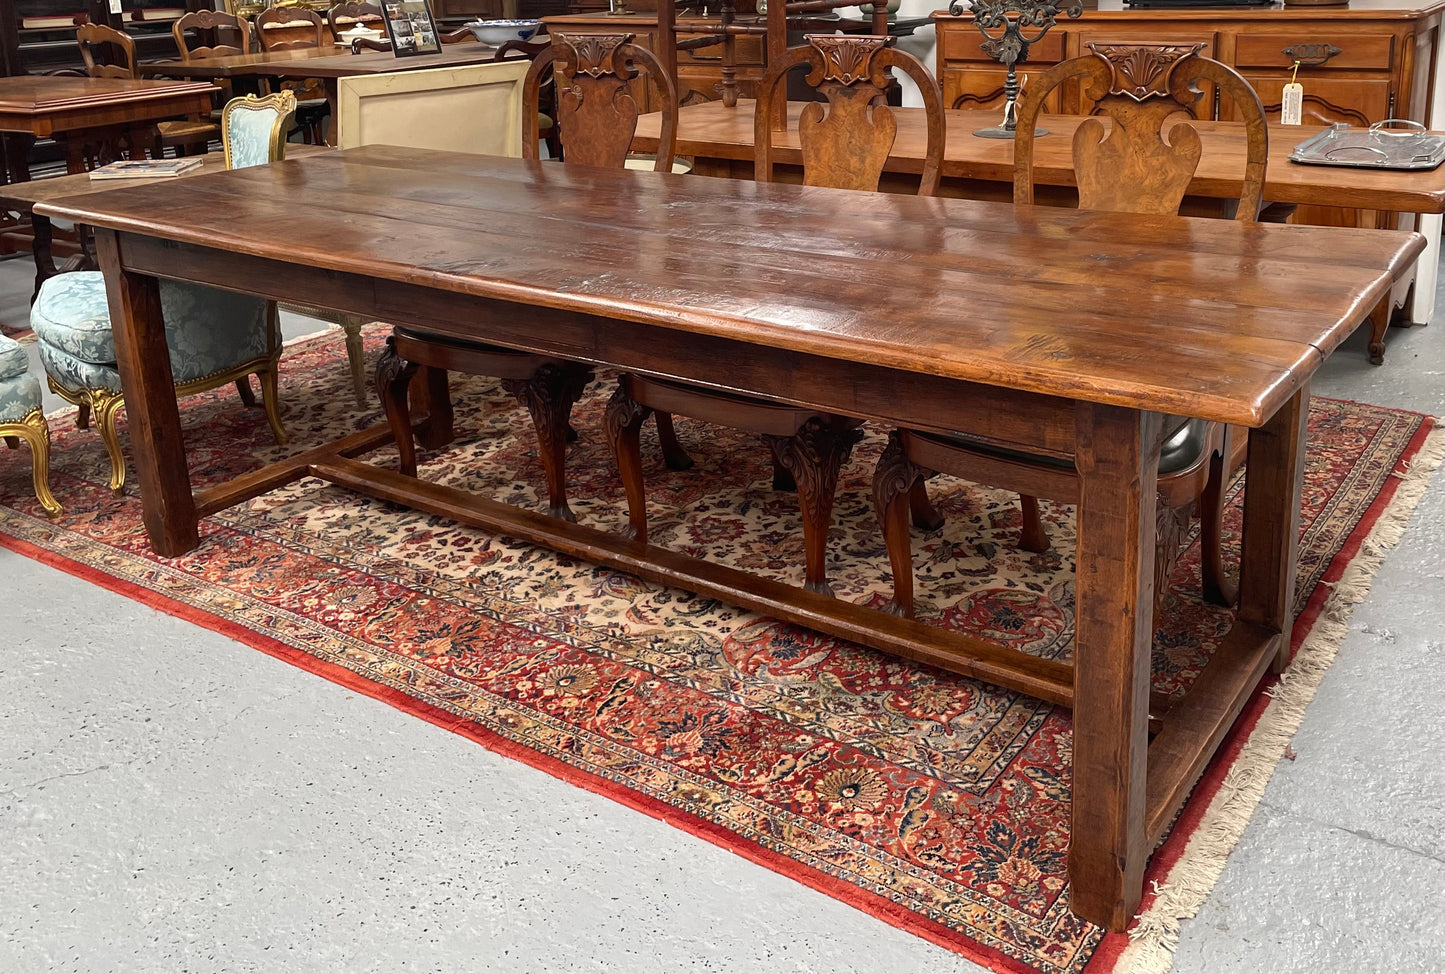 Rustic stretcher base dining table. The top consists of four heavy planks of French Oak timber. The surface is rustic and a little uneven and would require the use of place mats to even out. Please see photos as they form part of the description.